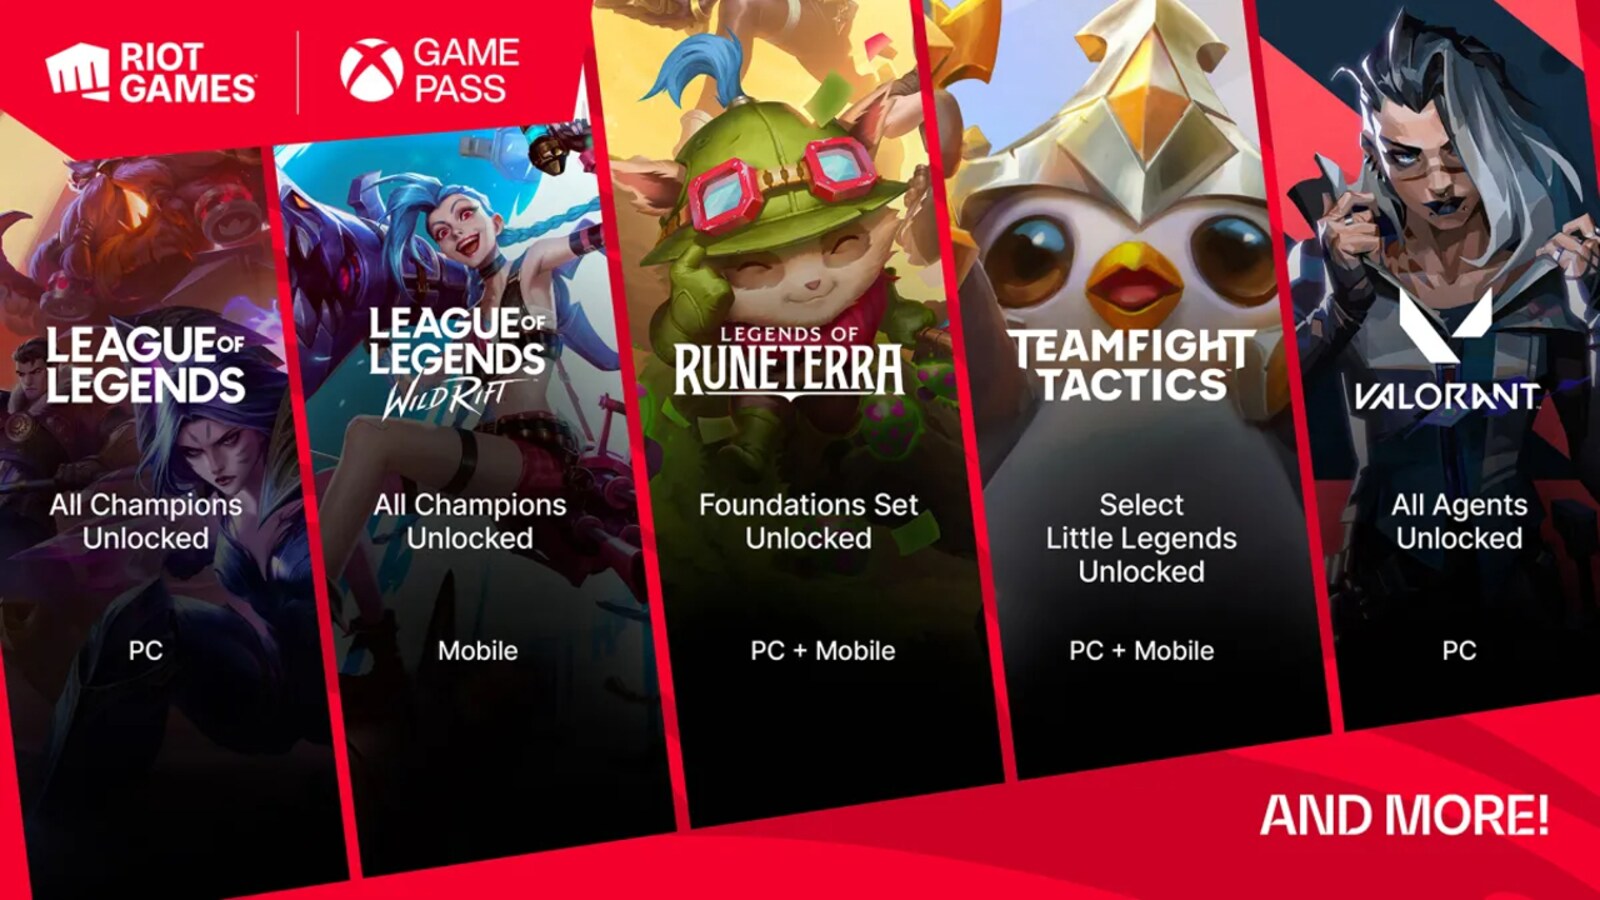 Xbox Game Pass is receiving 12 new games in December - Dot Esports